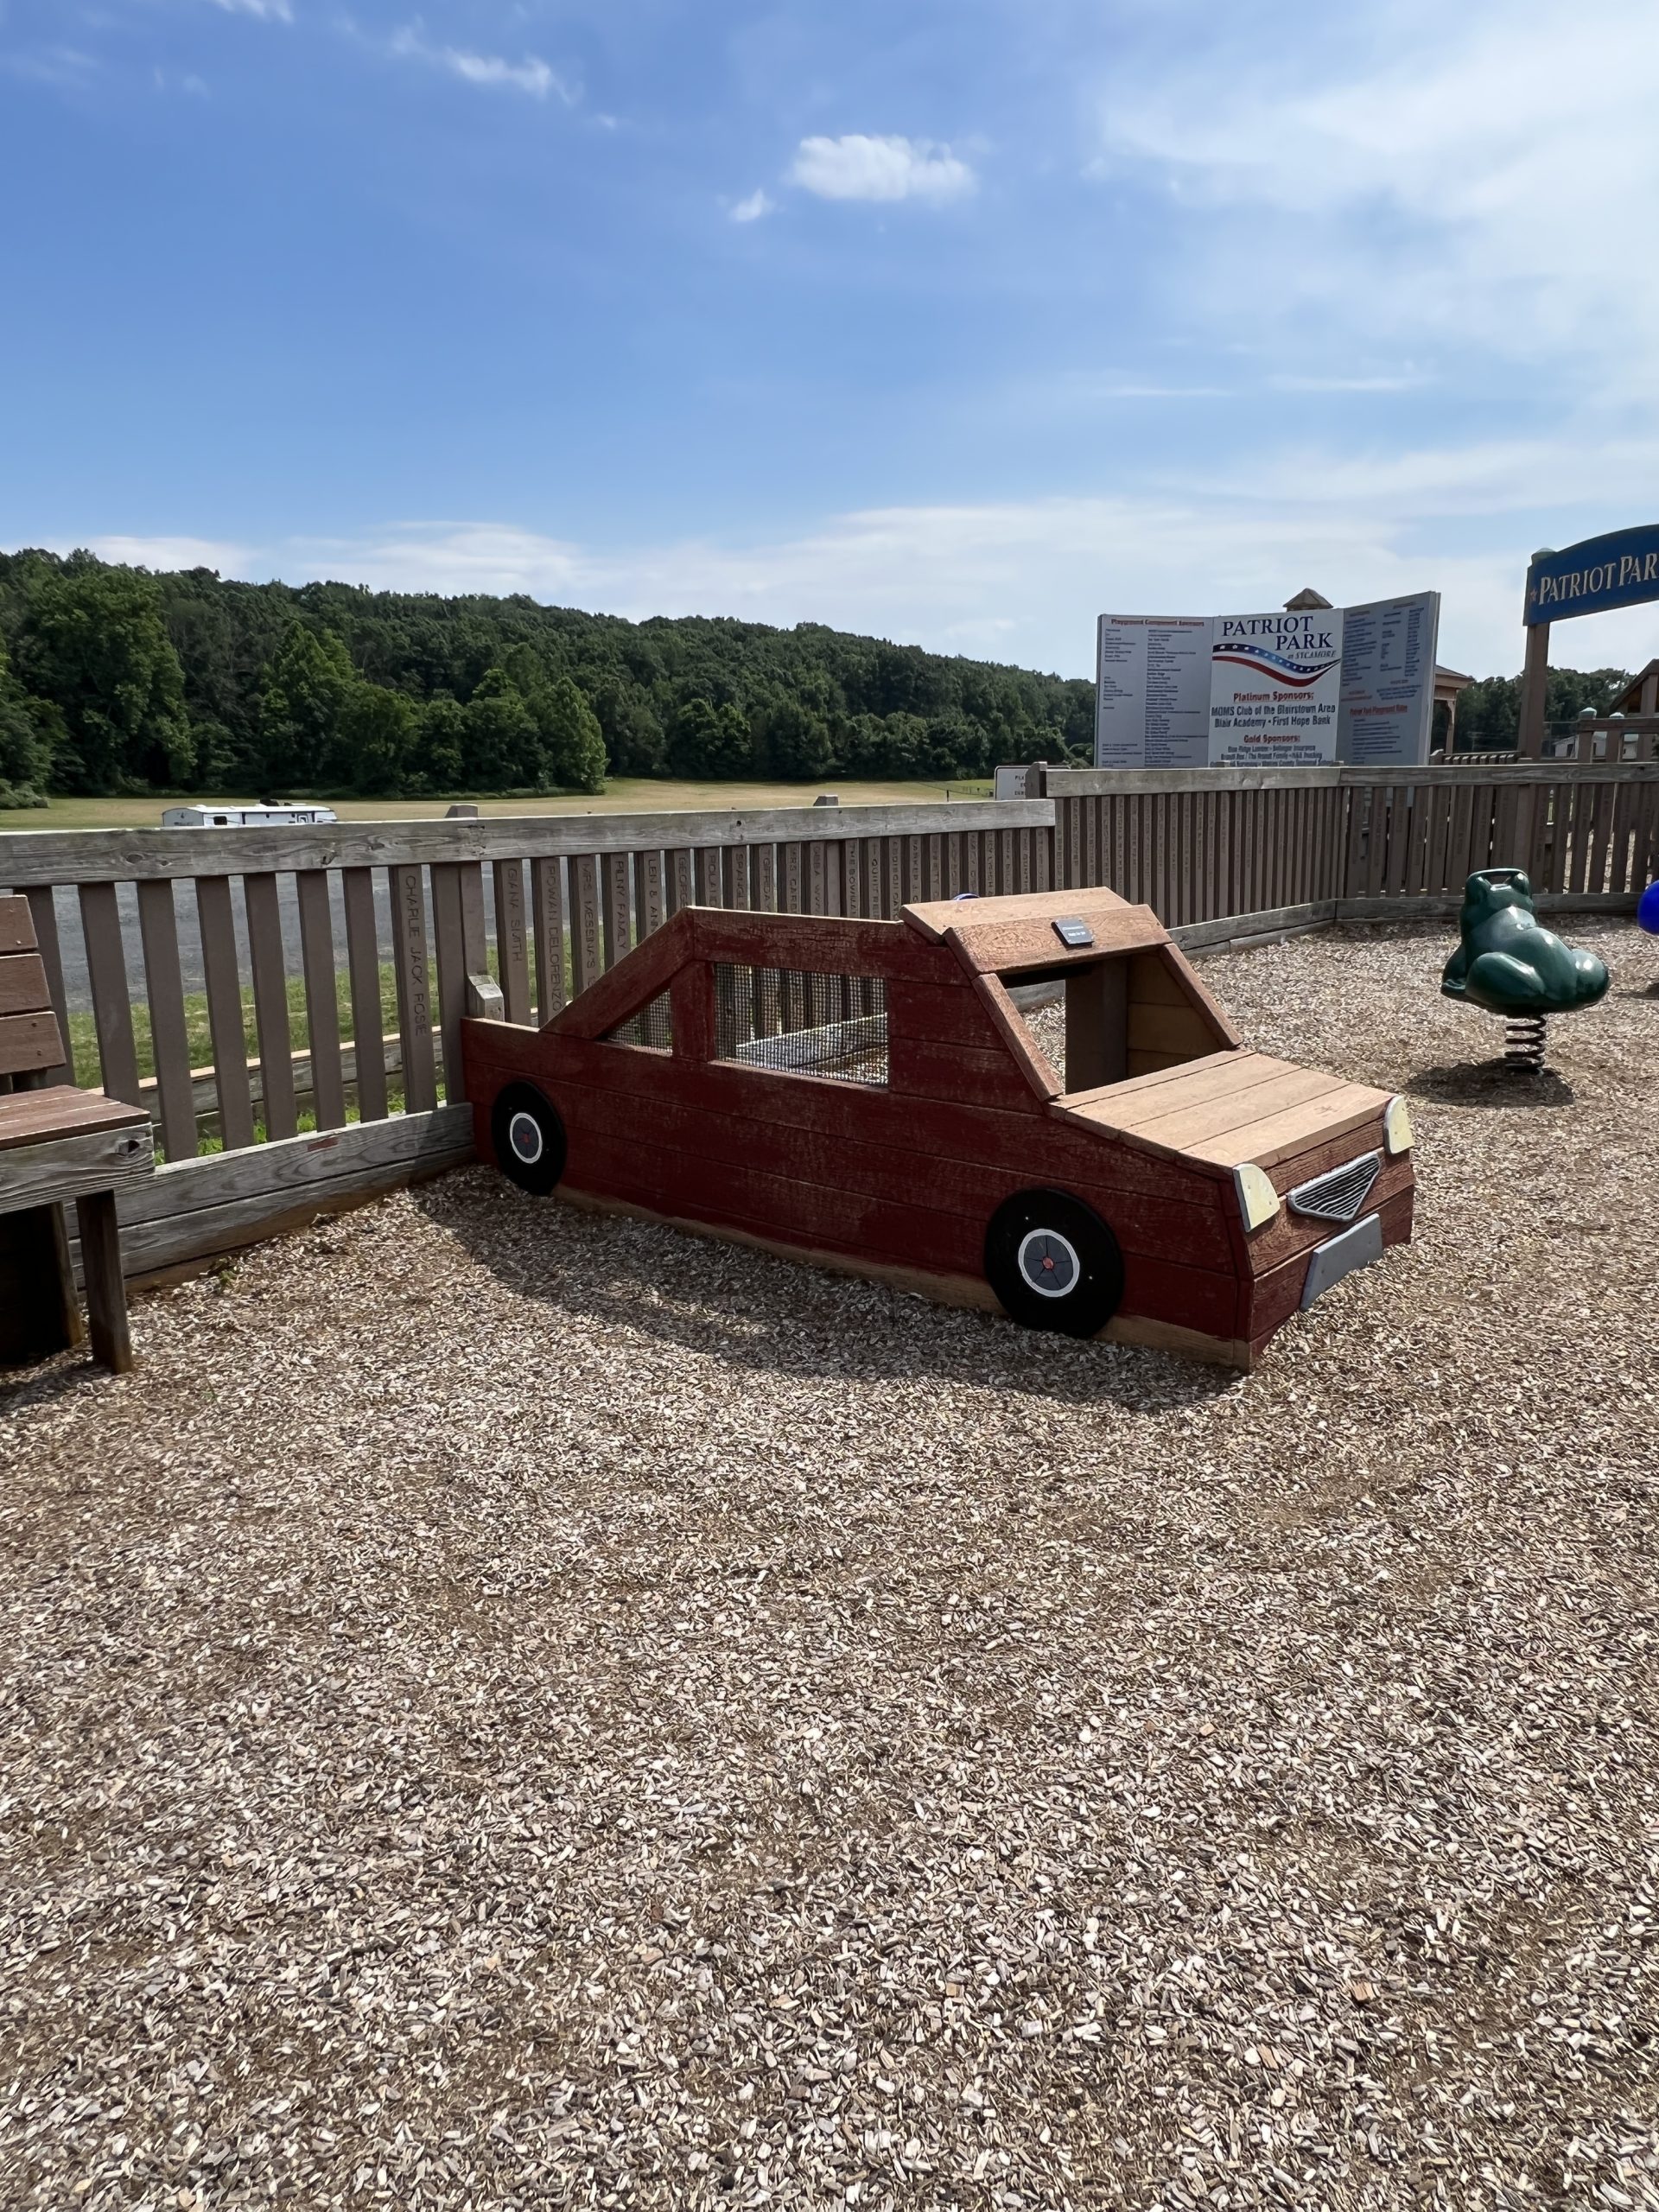 Sycamore Park Playground in Blairstown NJ - TOT LOT - Wooden Car TALL